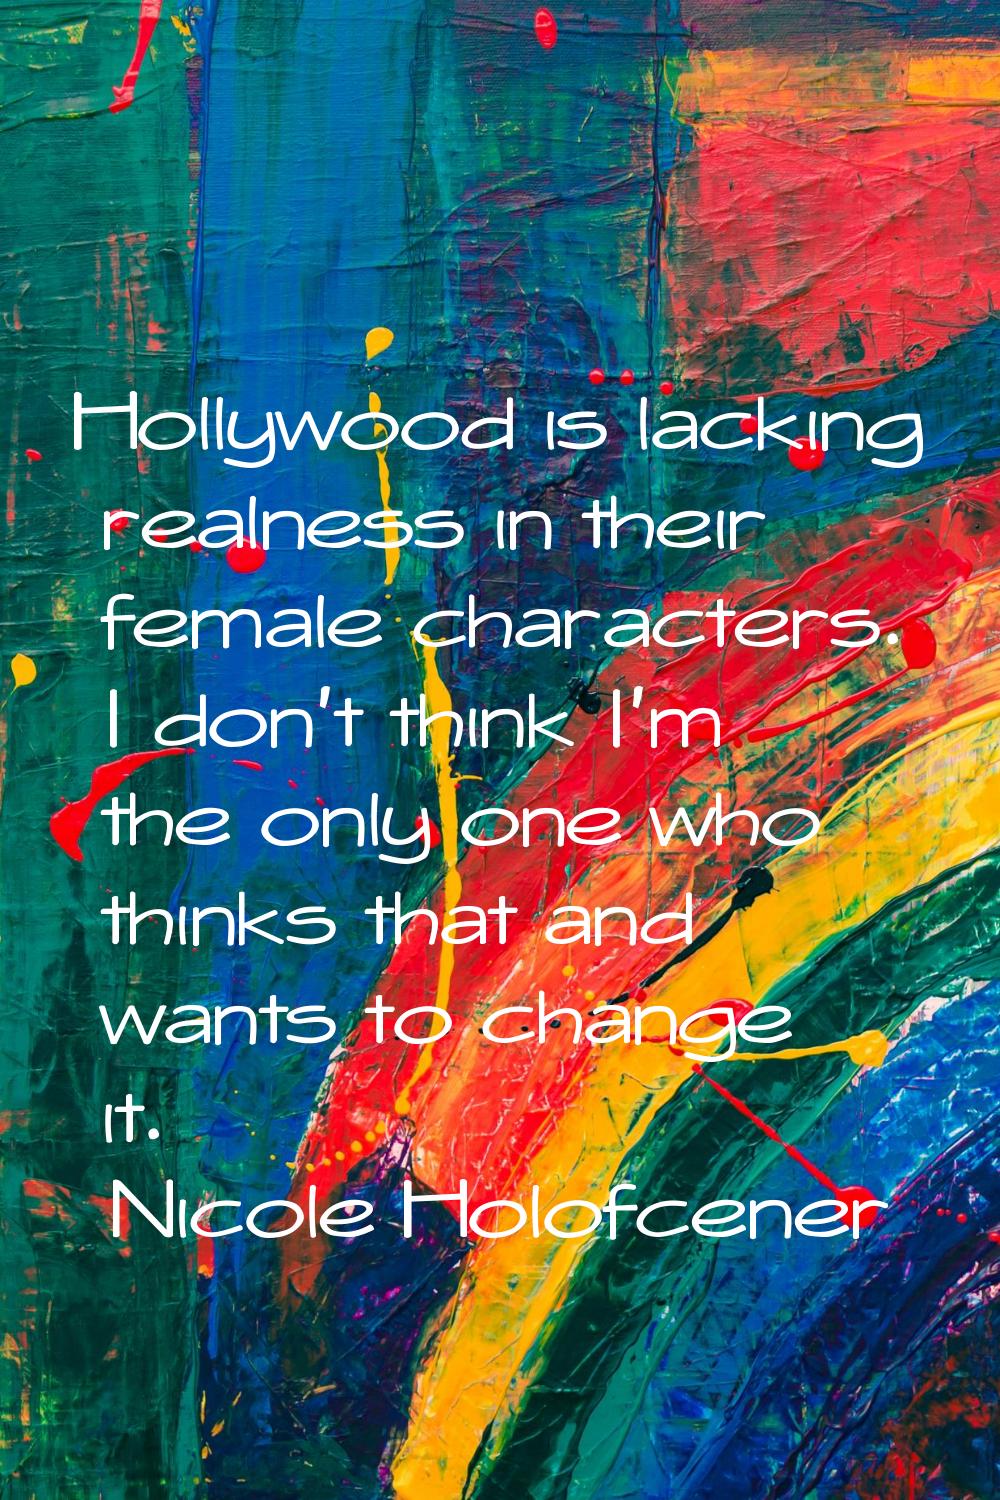 Hollywood is lacking realness in their female characters. I don't think I'm the only one who thinks